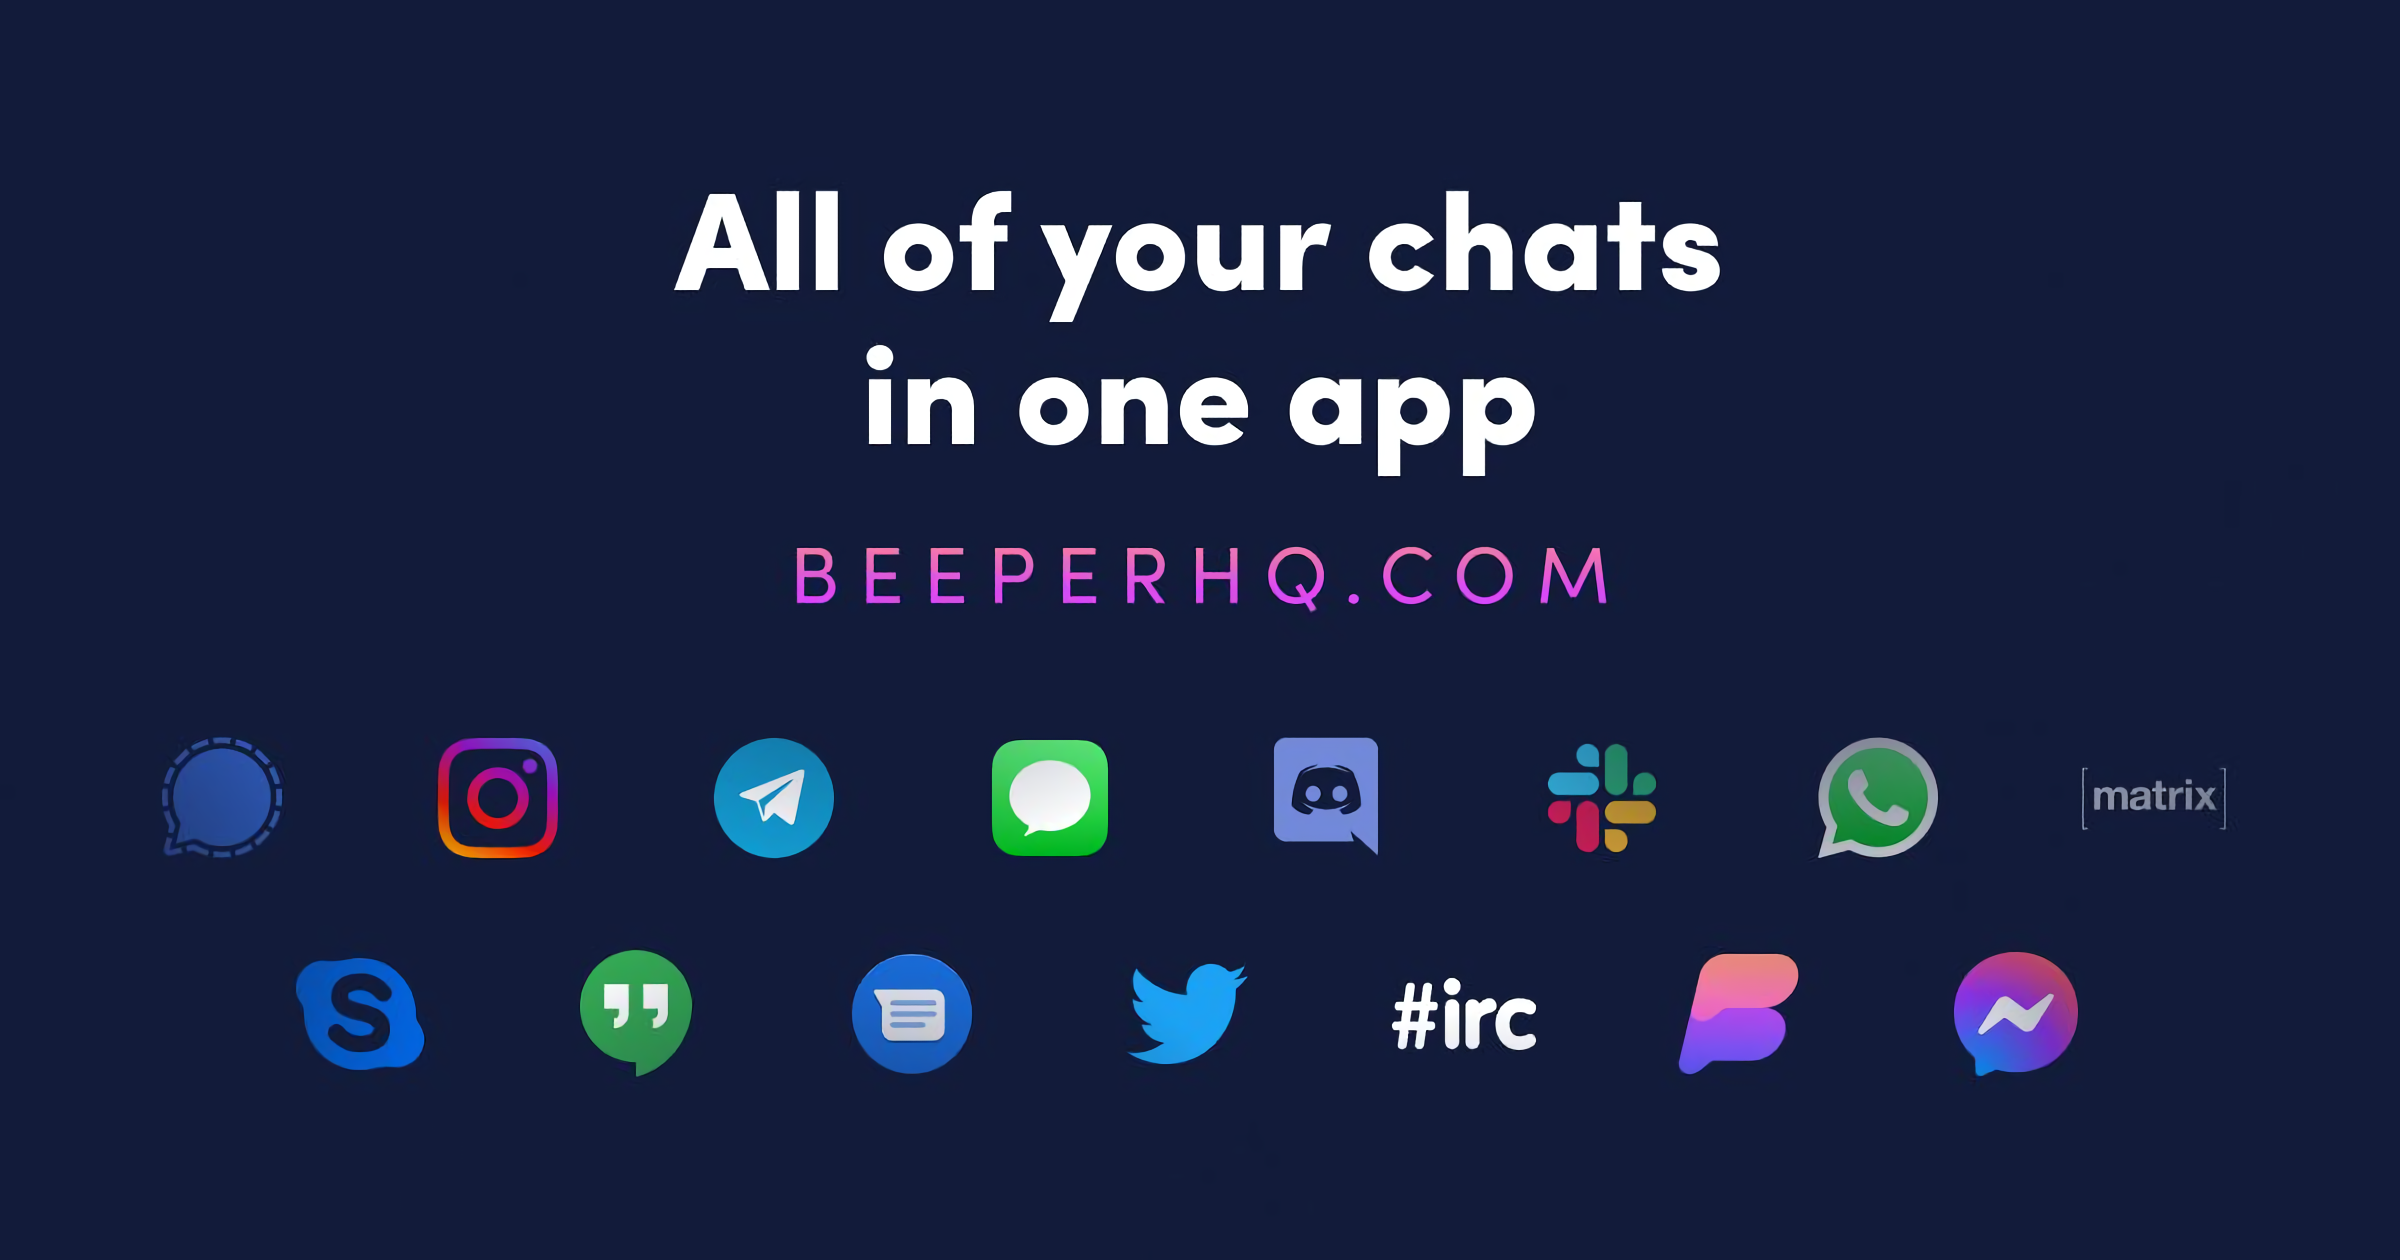 Pebble founder launches Beeper, a universal chat app that rolls 15 top services into one